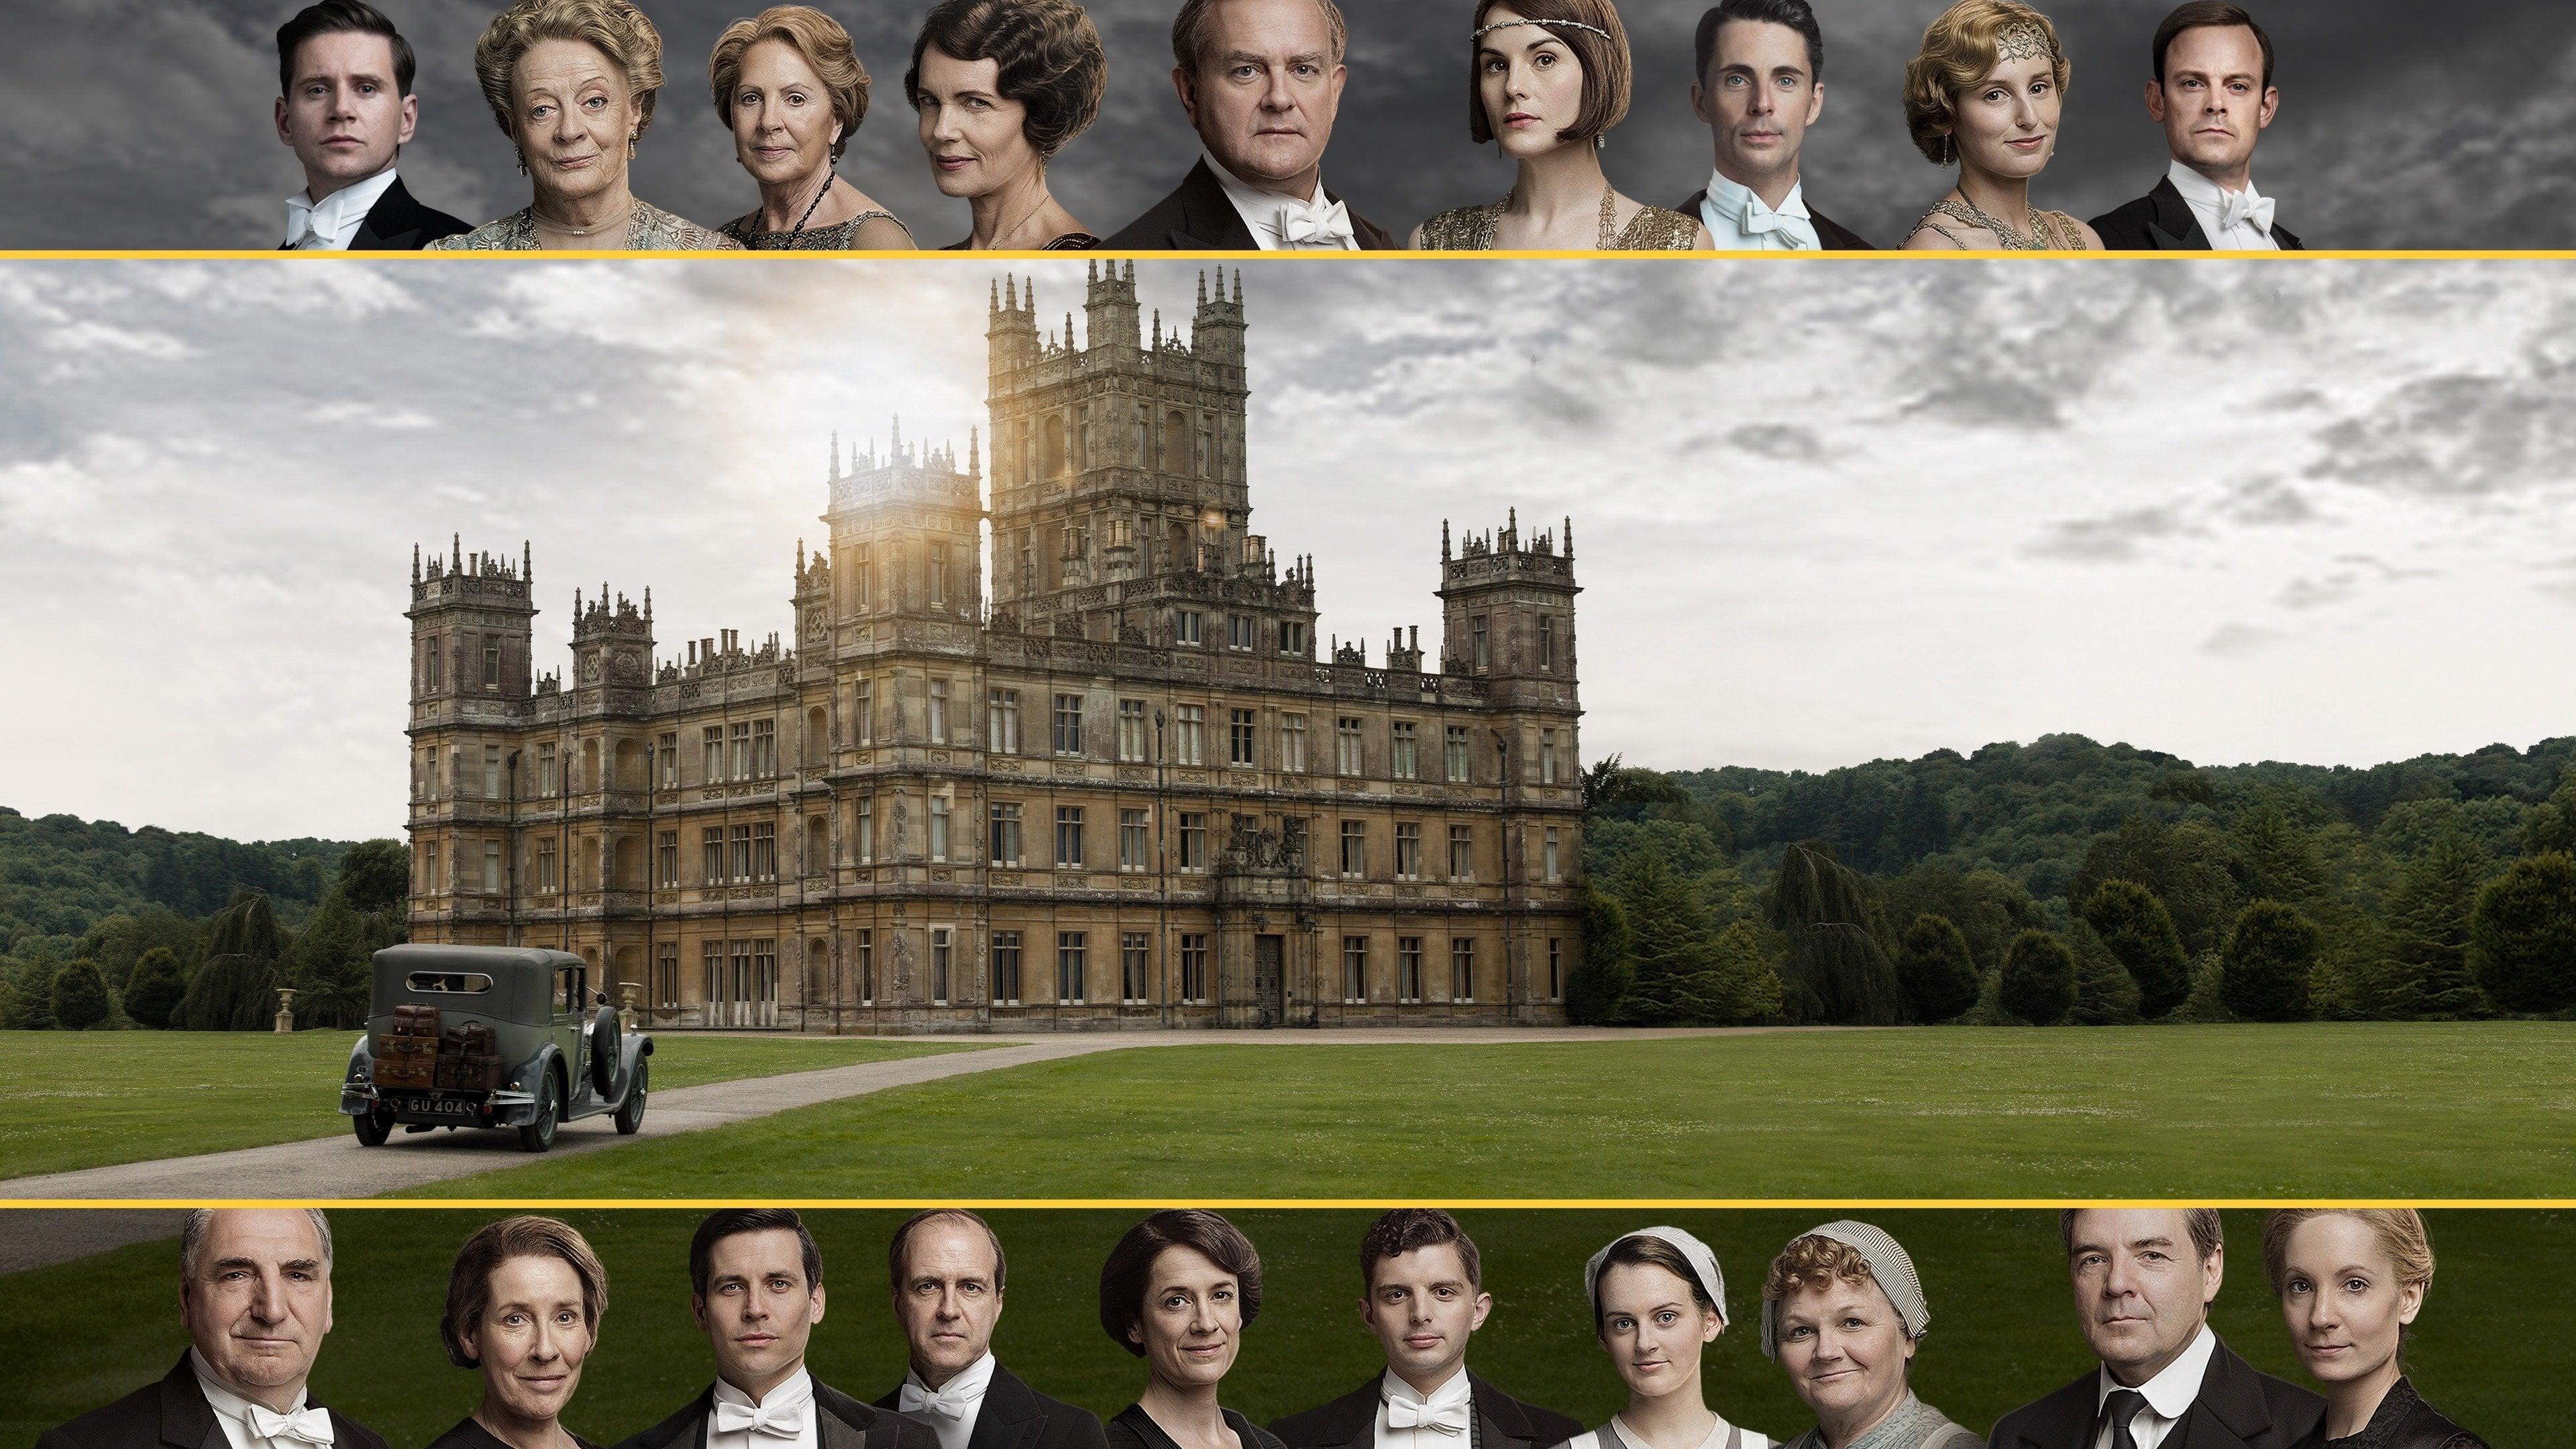 Return to Downton Abbey: A Grand Event backdrop